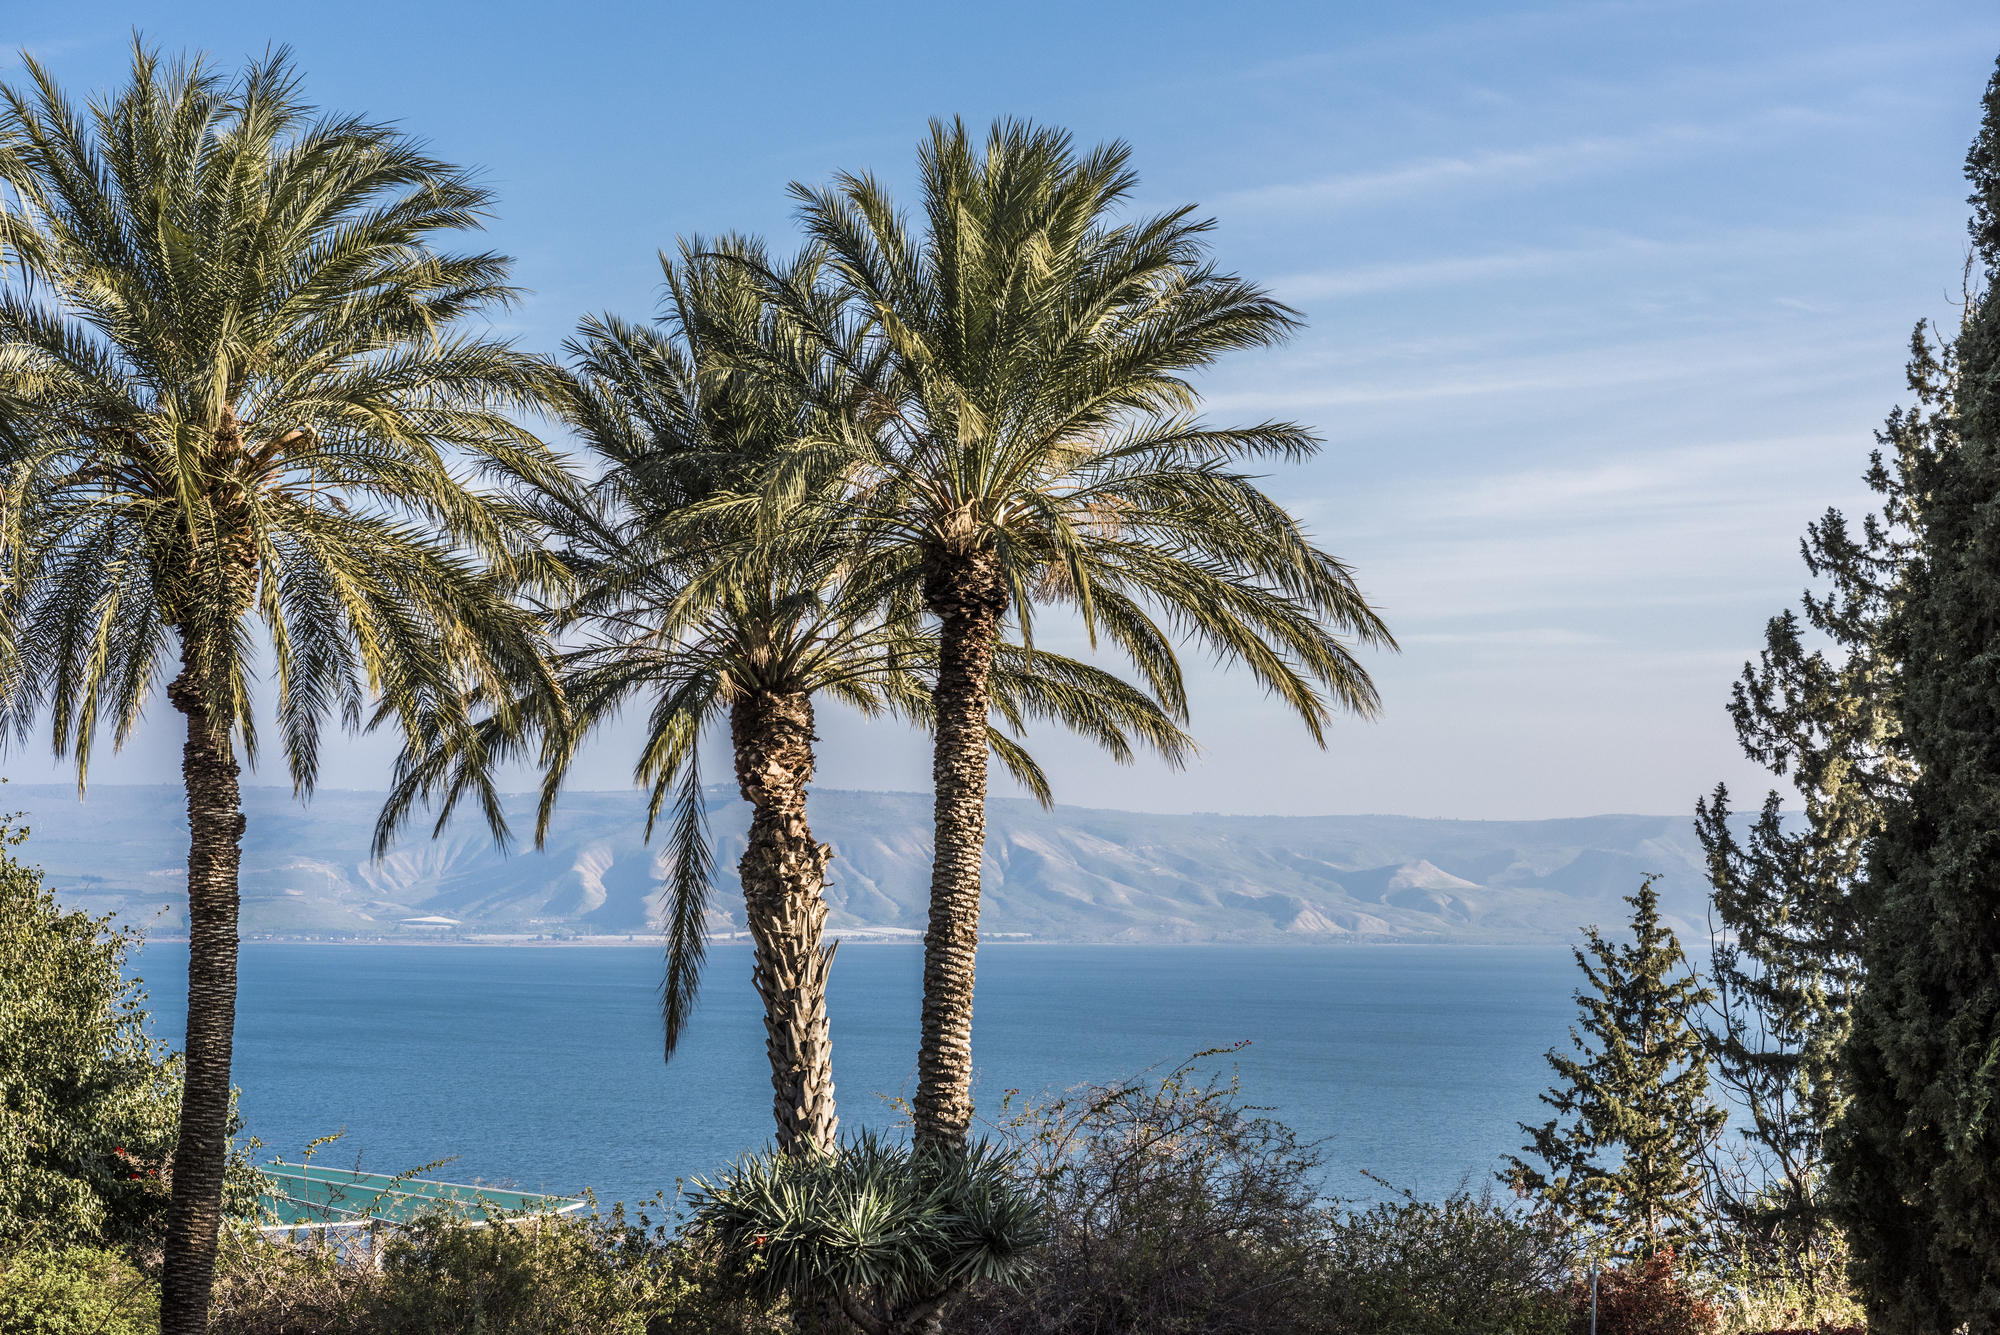 The shore of the sea of Galilee